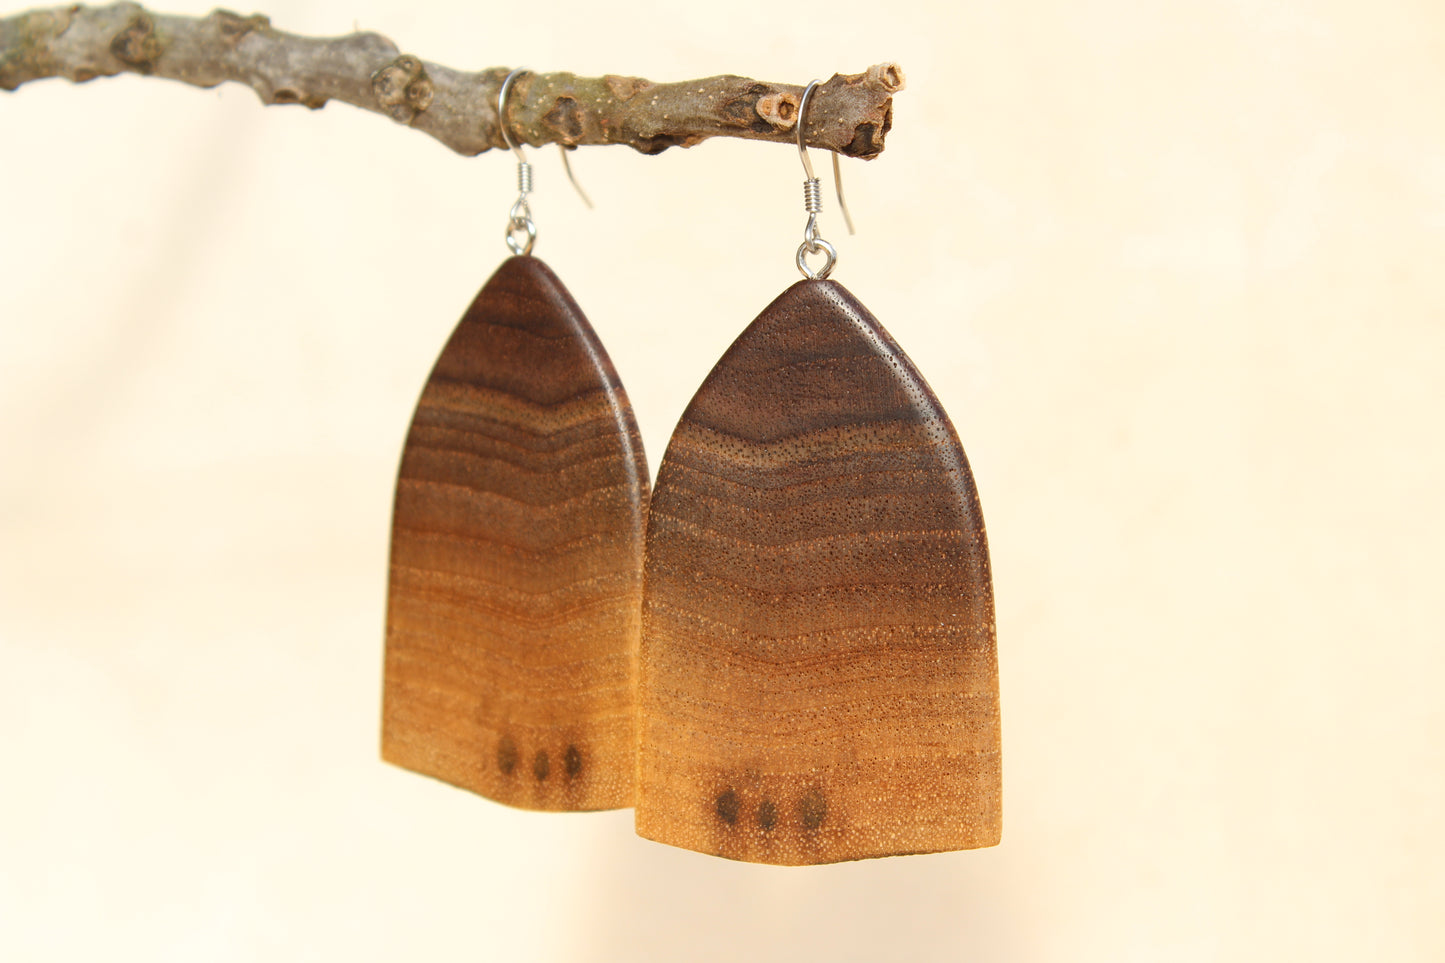 Natural Wooden Earrings - Black Walnut wood with live edge design